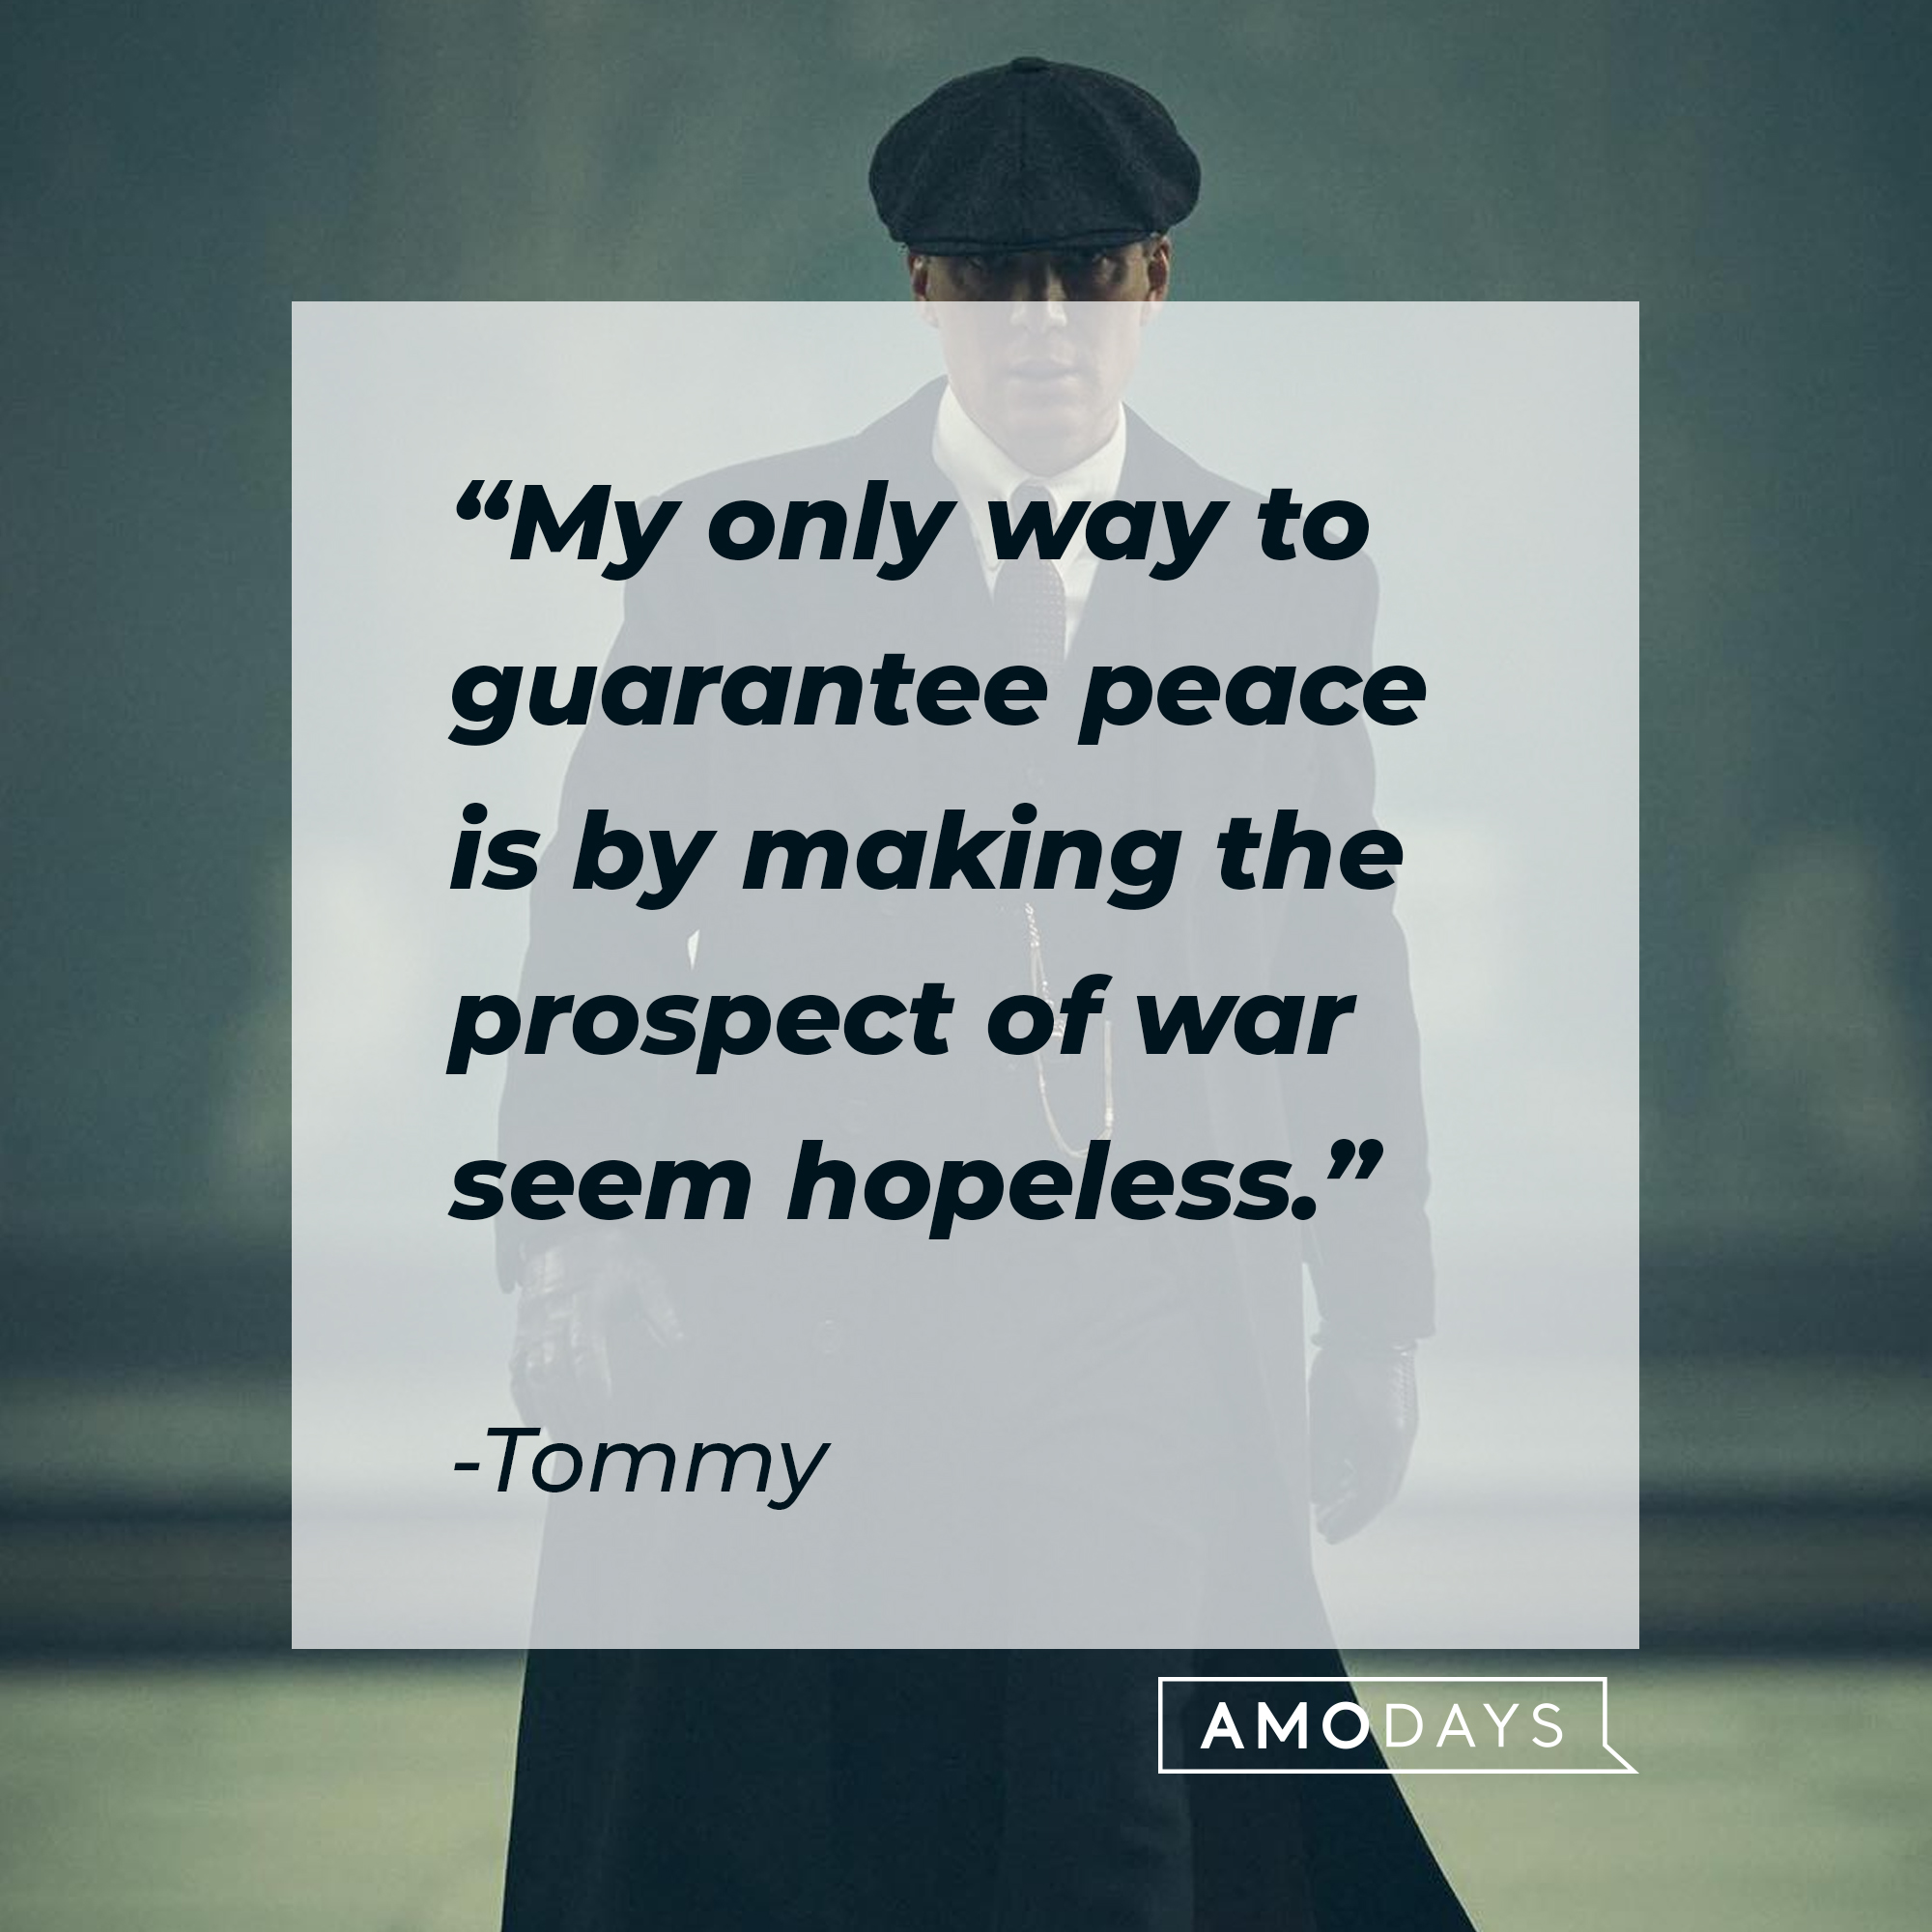 Tommy's quote: "My only way to guarantee peace is by making the prospect of war seem hopeless." | Source: facebook.com/PeakyBlinders